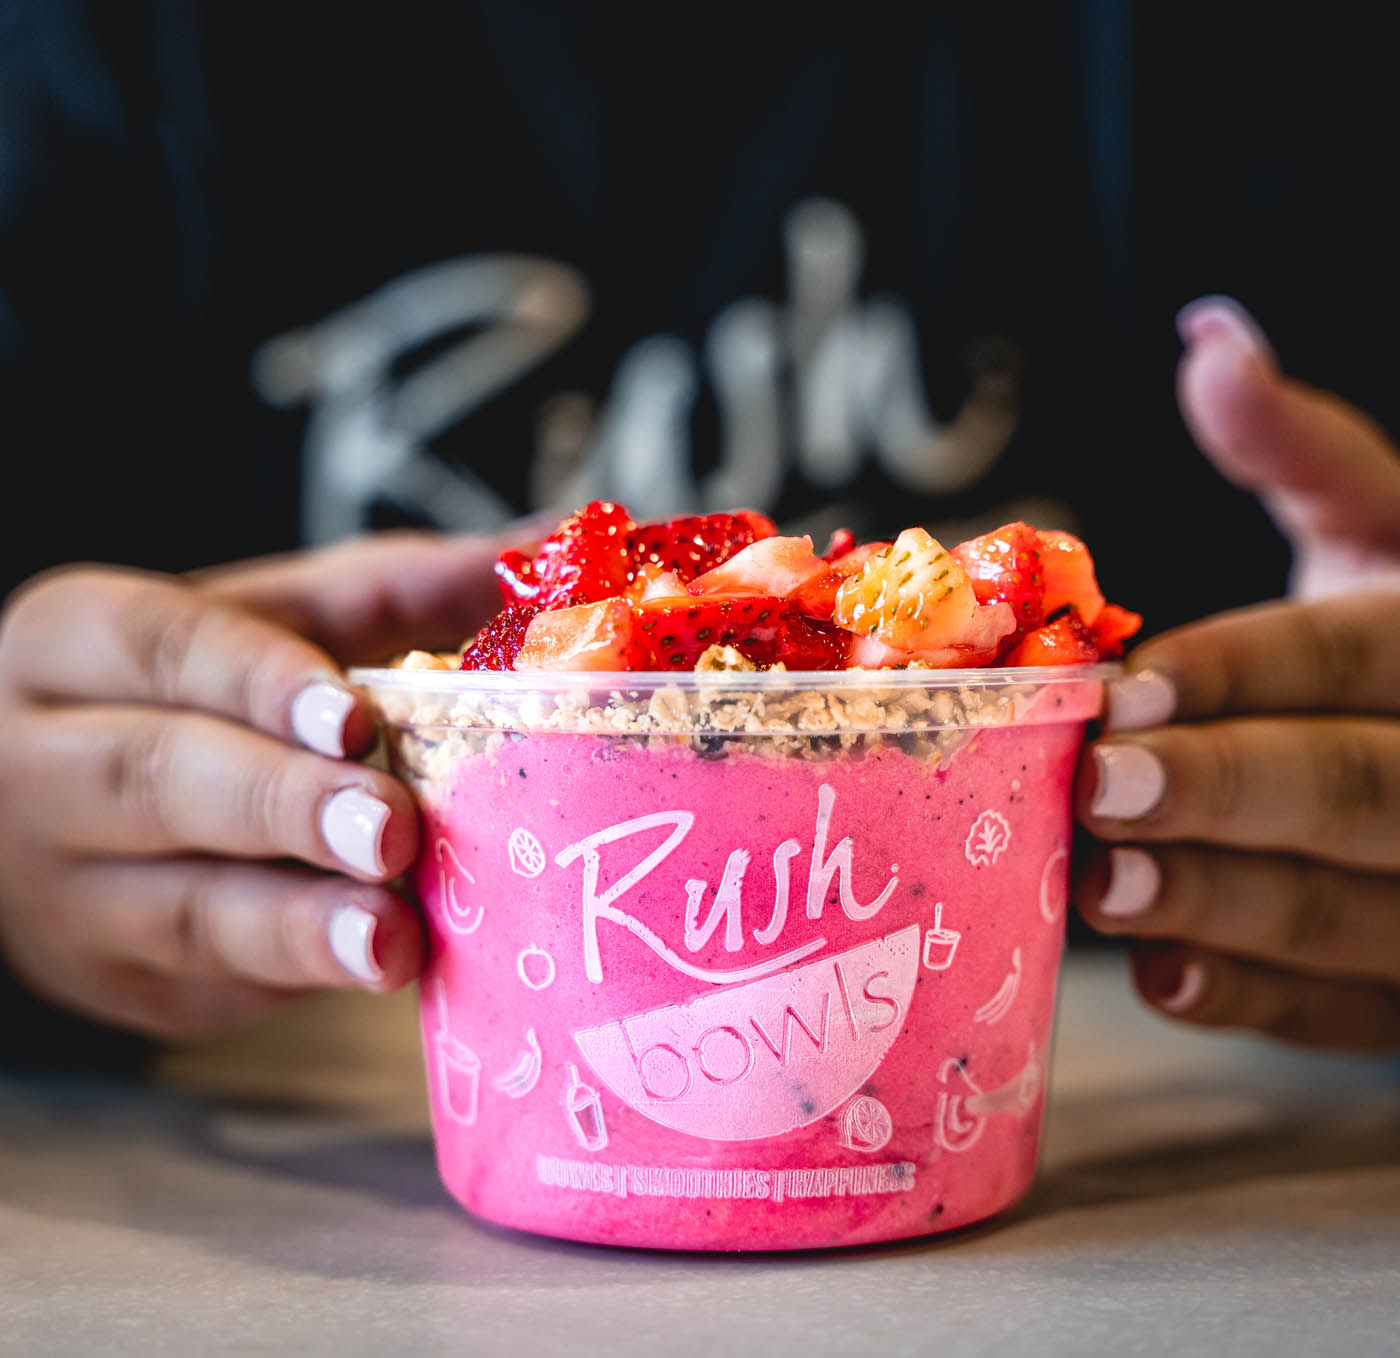 A delicious pink smoothie bowl from Rush Bowls - we can't wait to serve you!